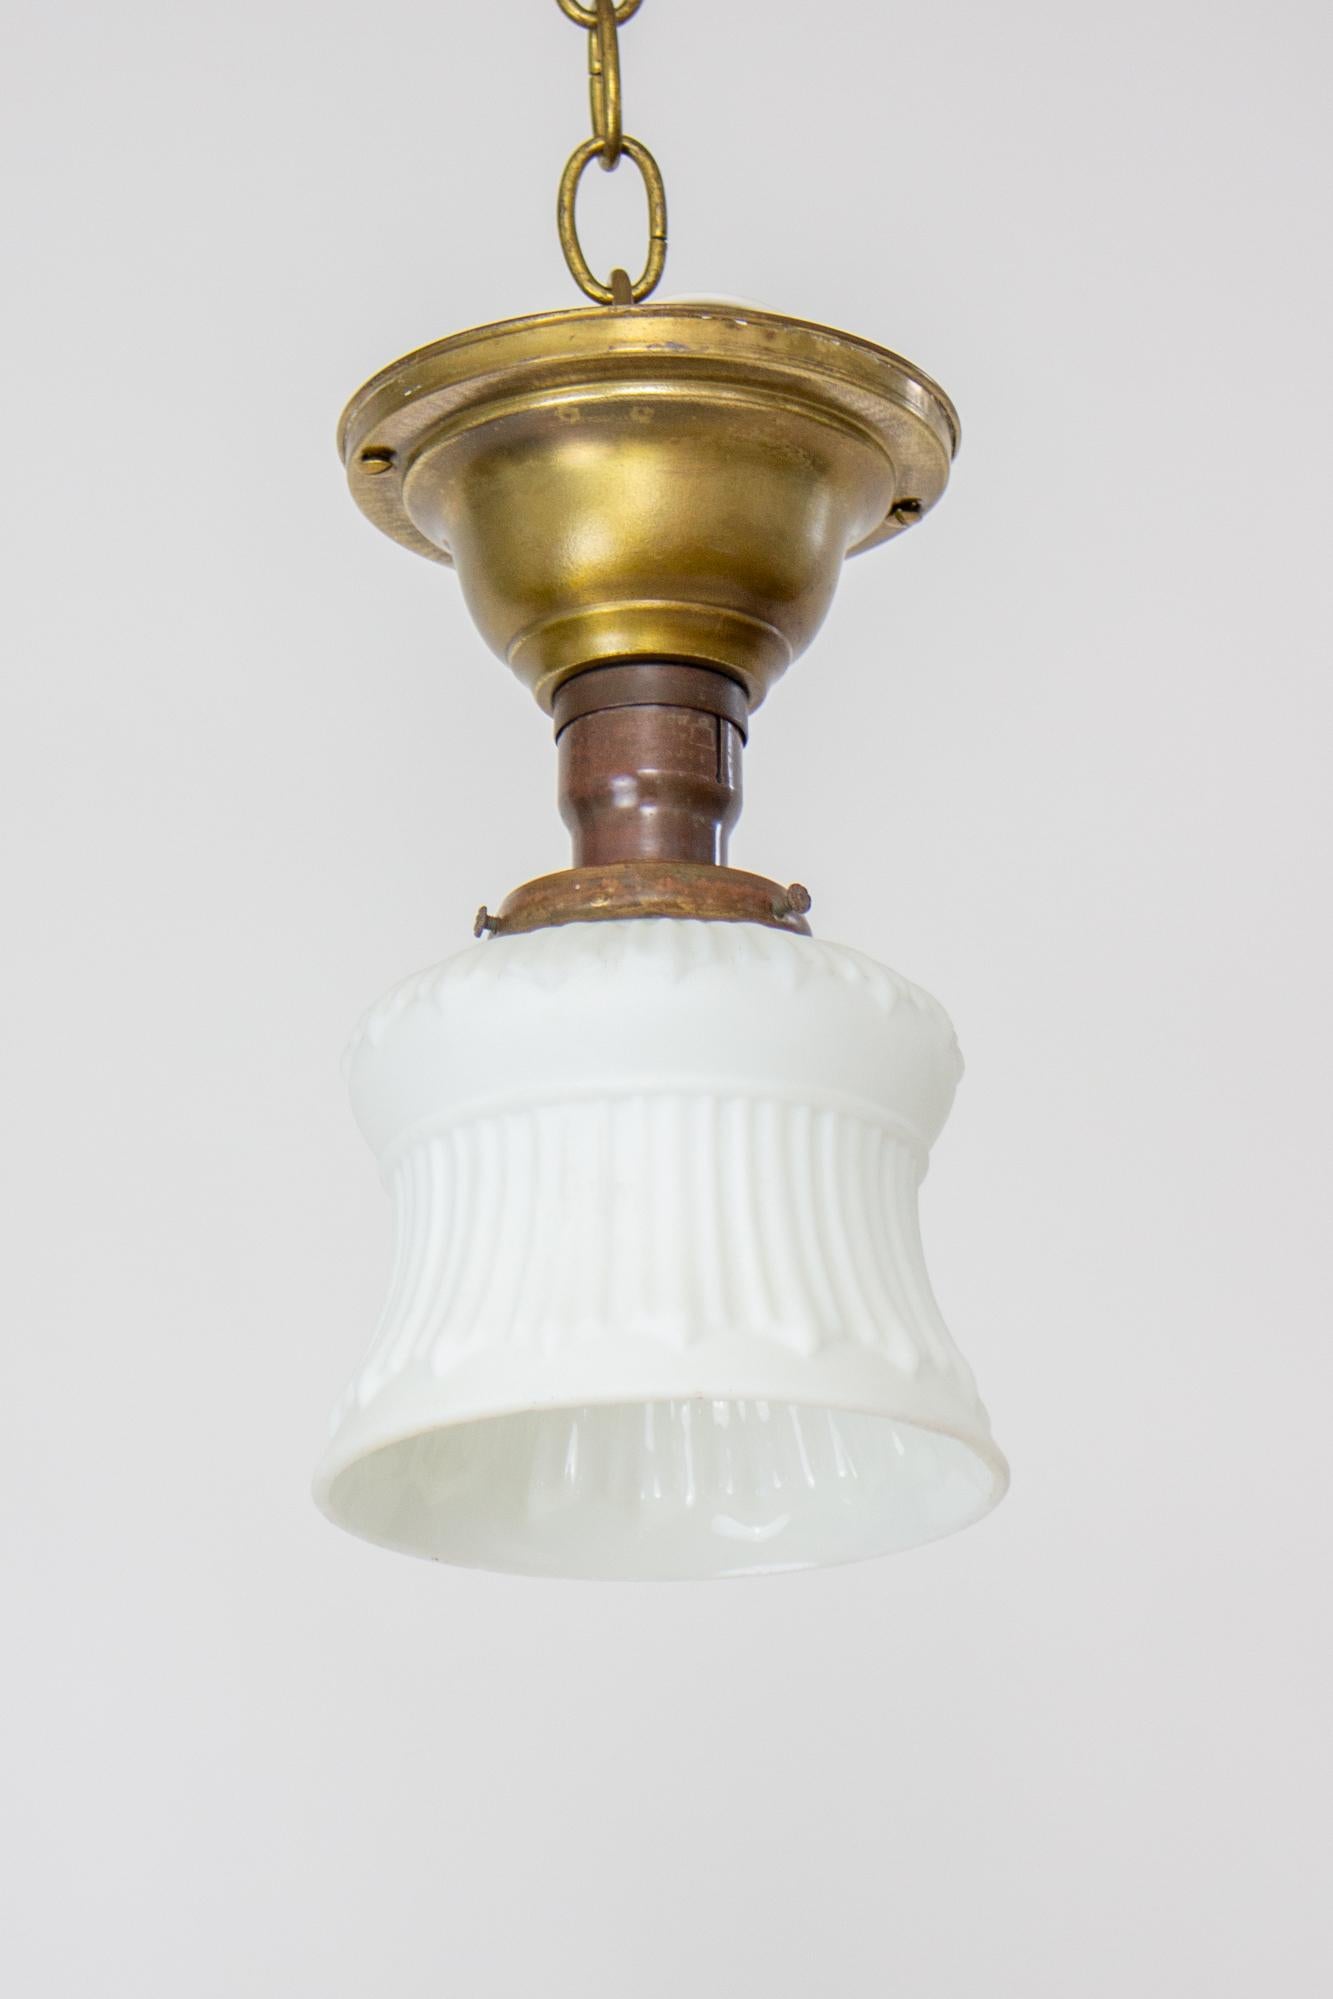 Early 20th century small white glass neoclassical revival flush pendant. Matte white relief glass in a classical pattern. Simple brass flush mount pendant. Rewired and ready for installation in the US. Glass in very good condition with some